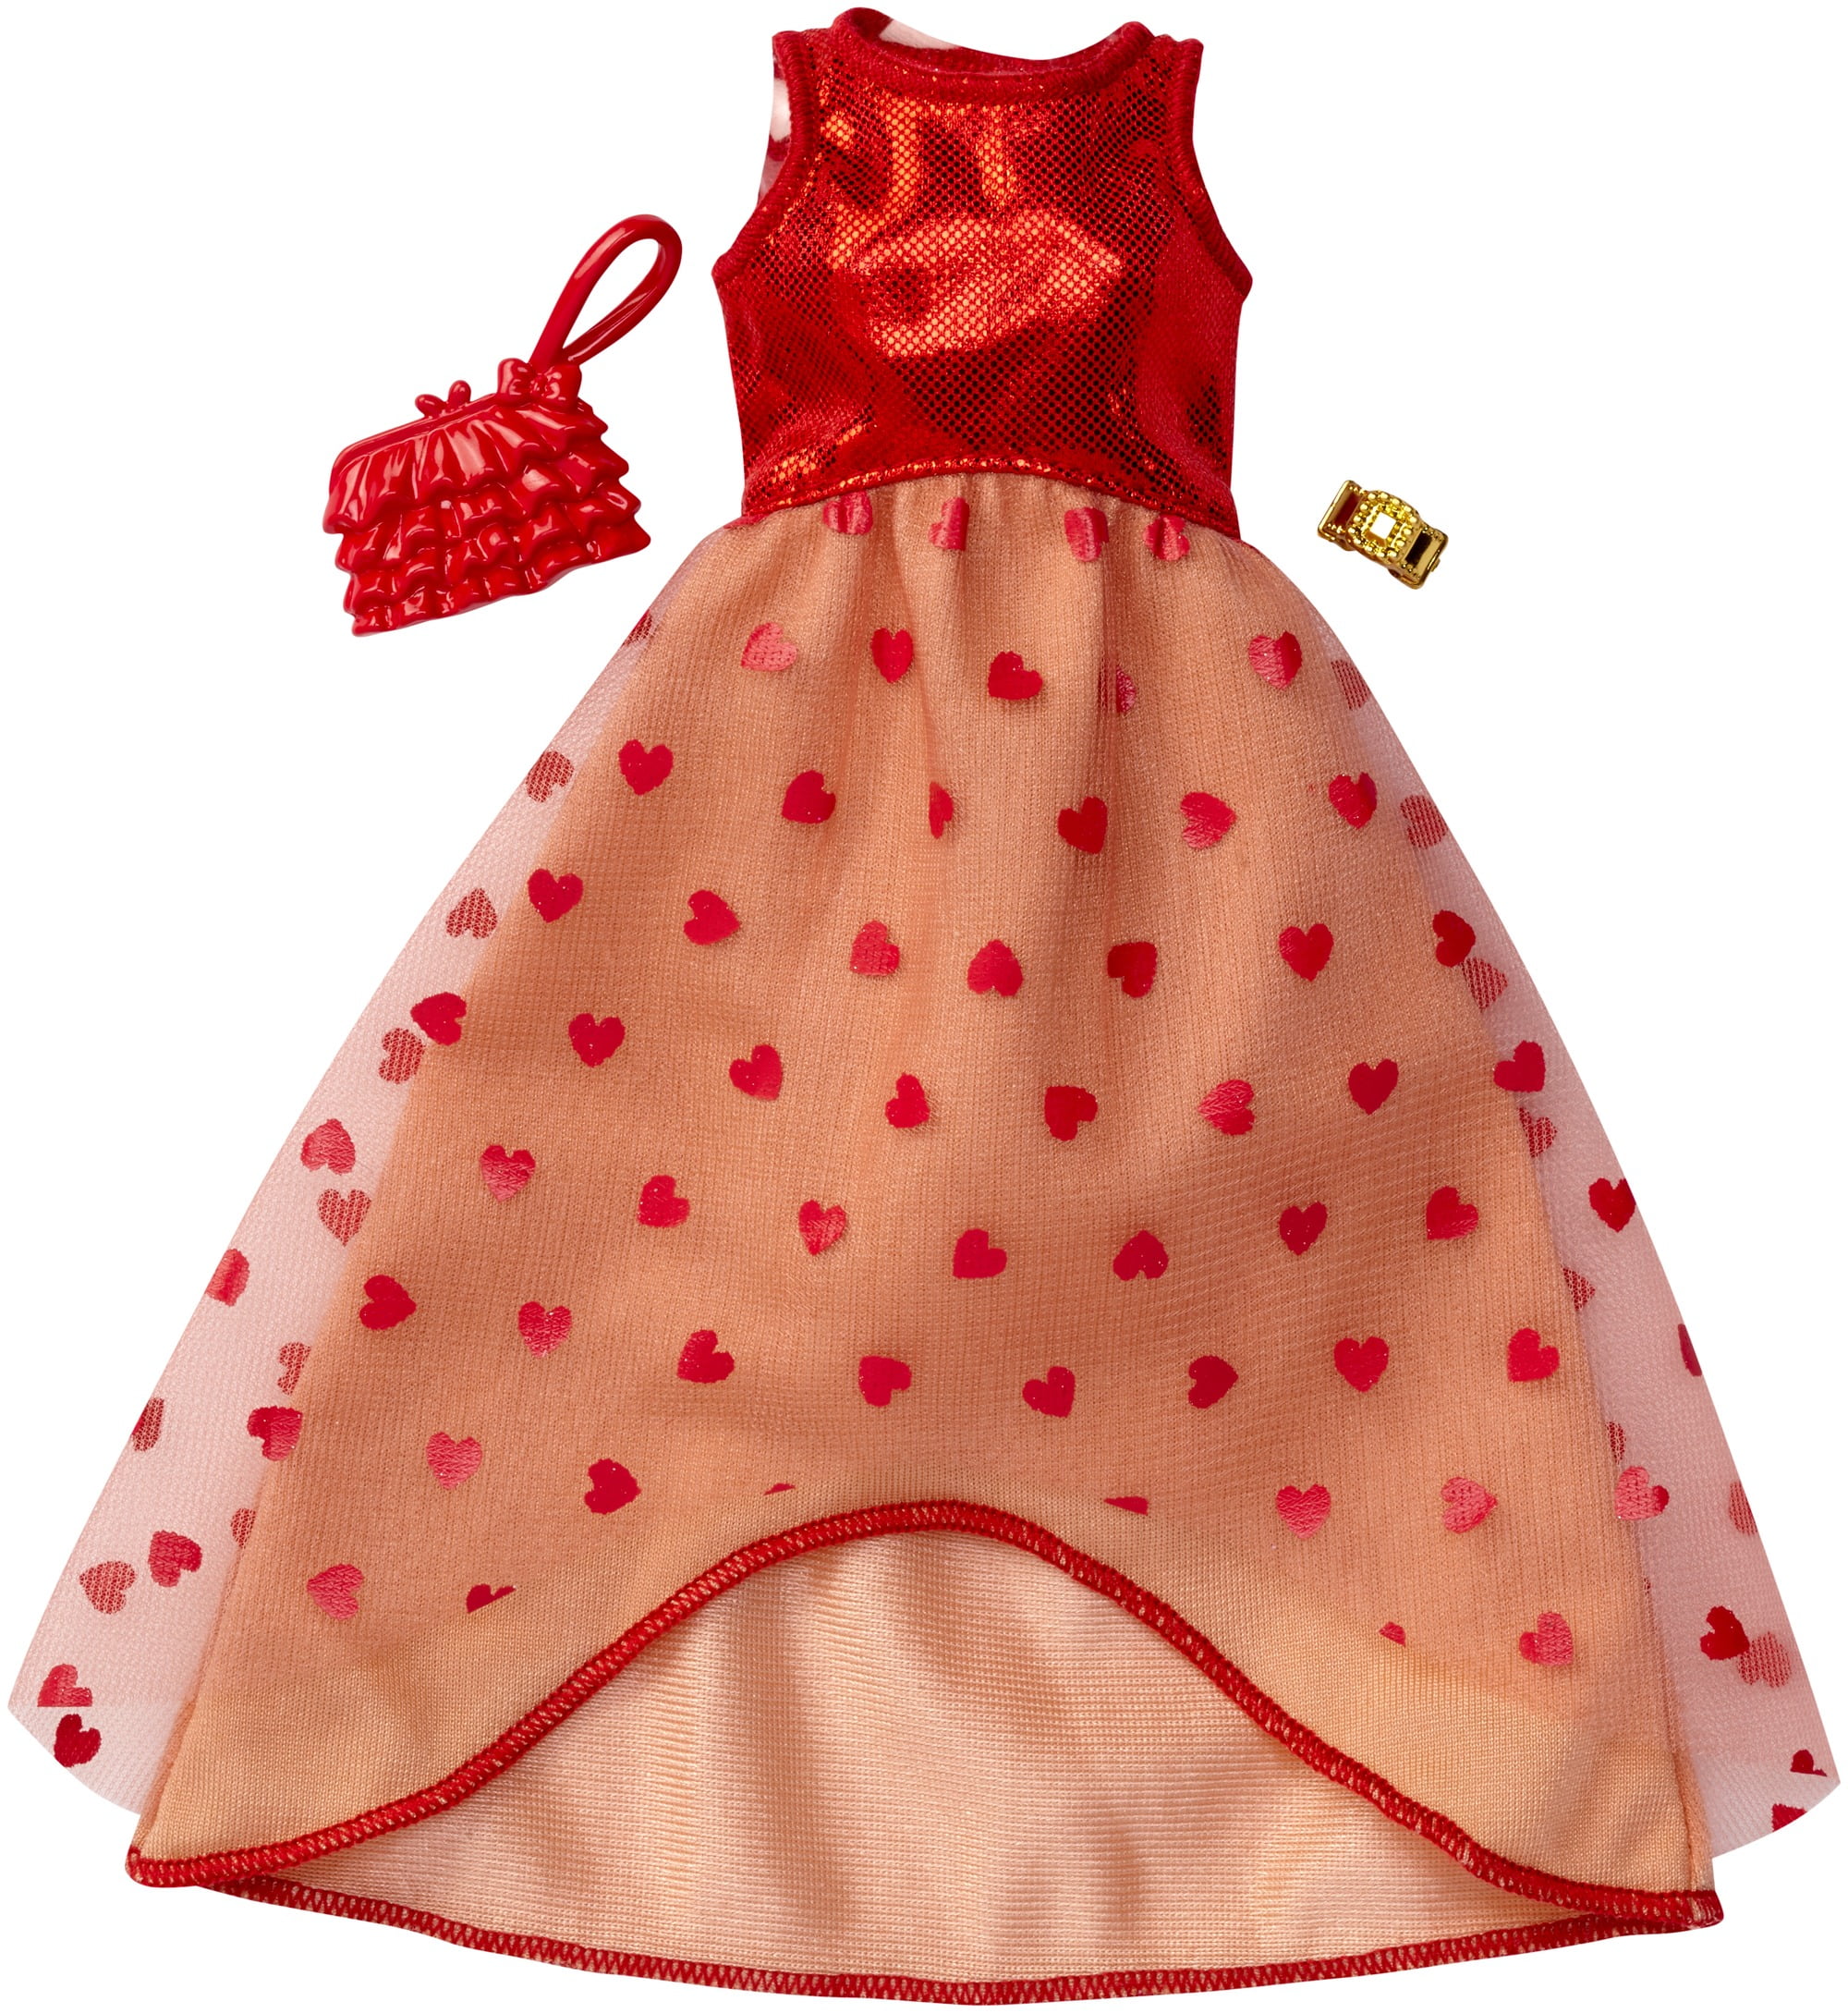 NEW BARBIE DOLL CLOTHES,FASHION PACK RED & GOLD DRESS 